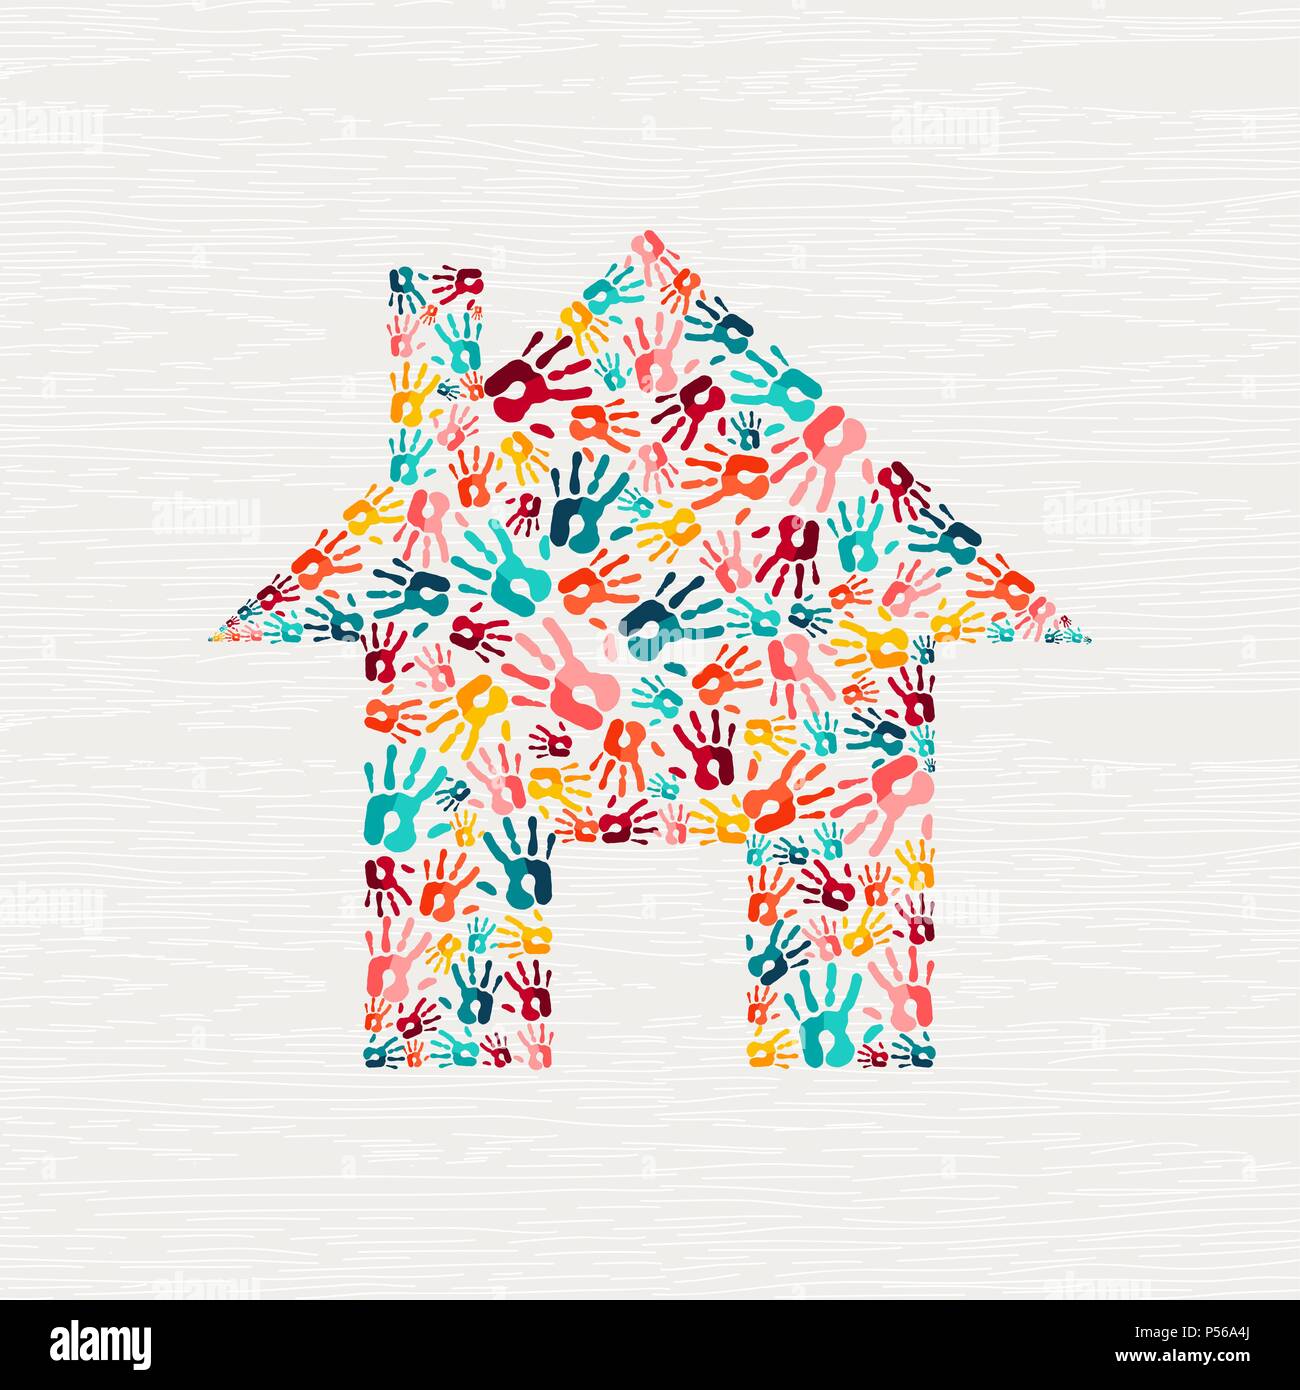 Human hand print house shape concept. Colorful paint handprint background for community home or social project. EPS10 vector. Stock Vector